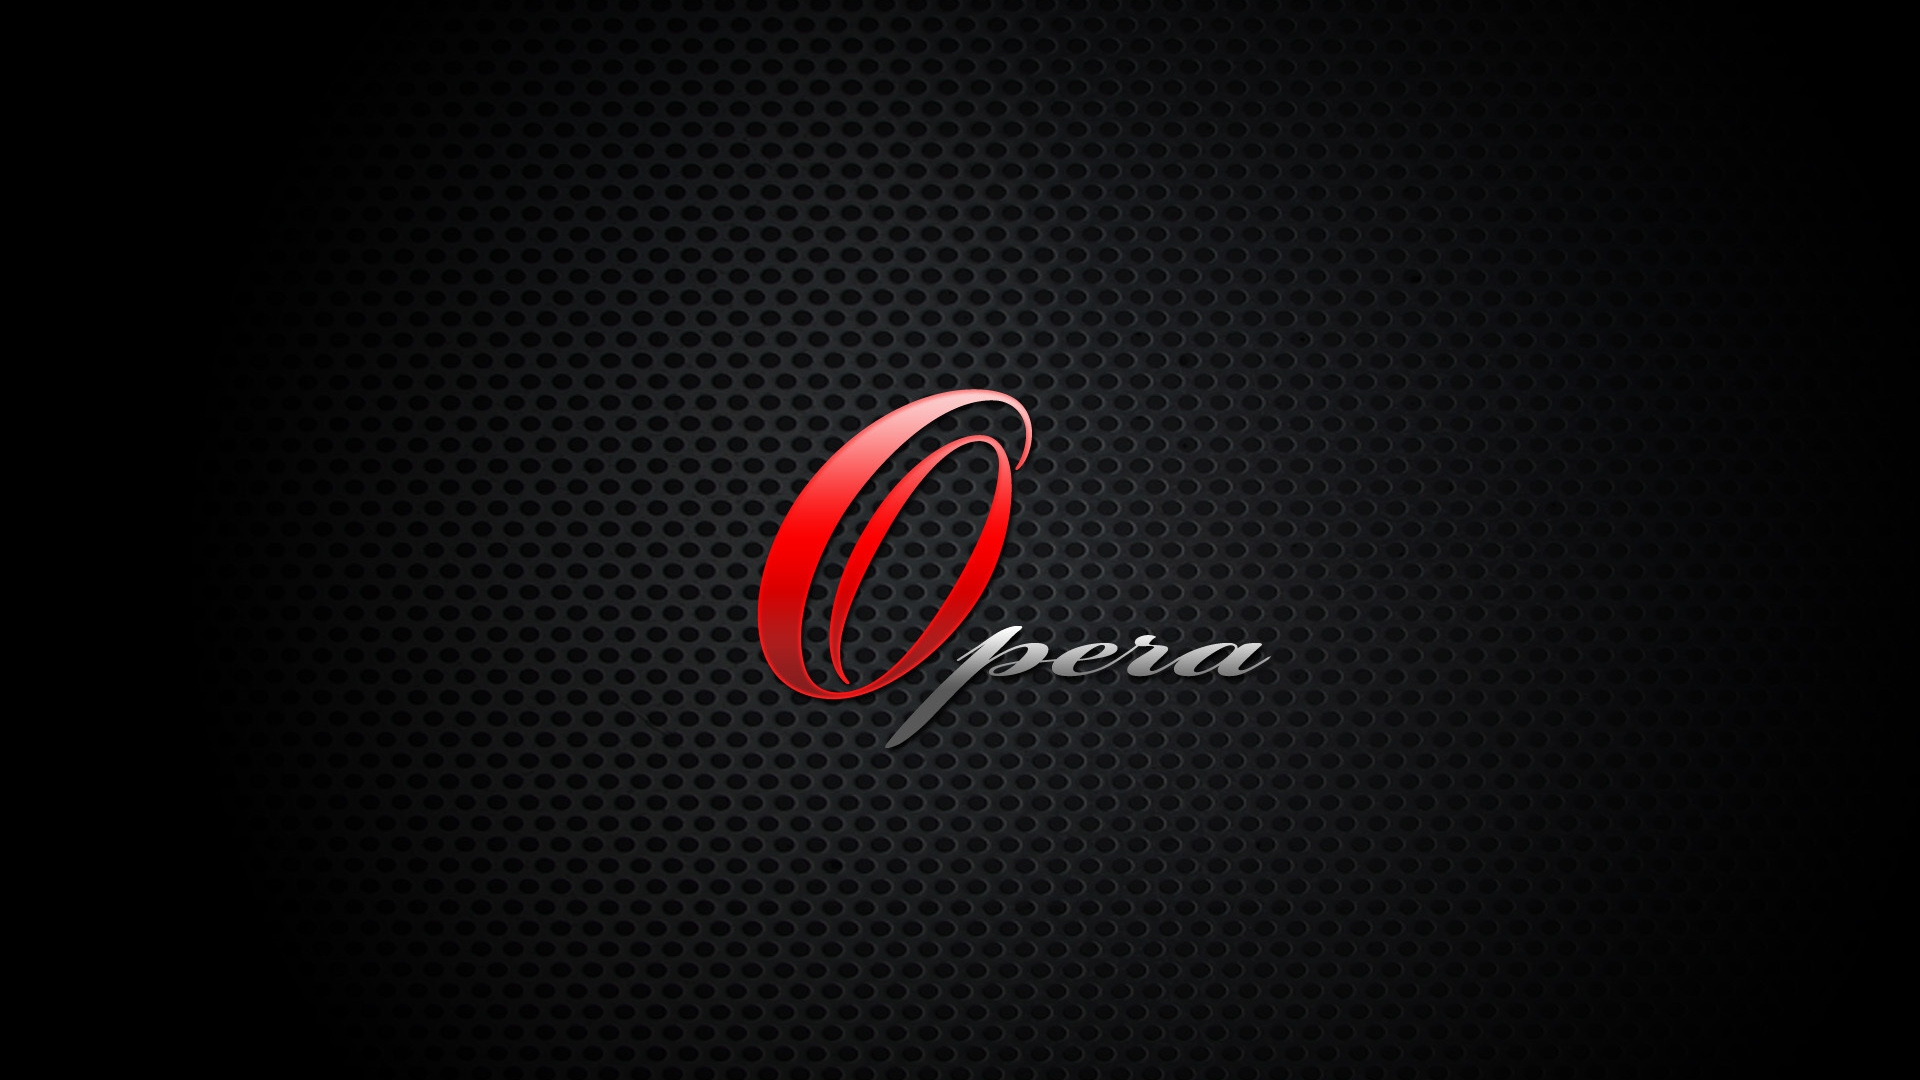 Opera Browser Tech for 1920 x 1080 HDTV 1080p resolution